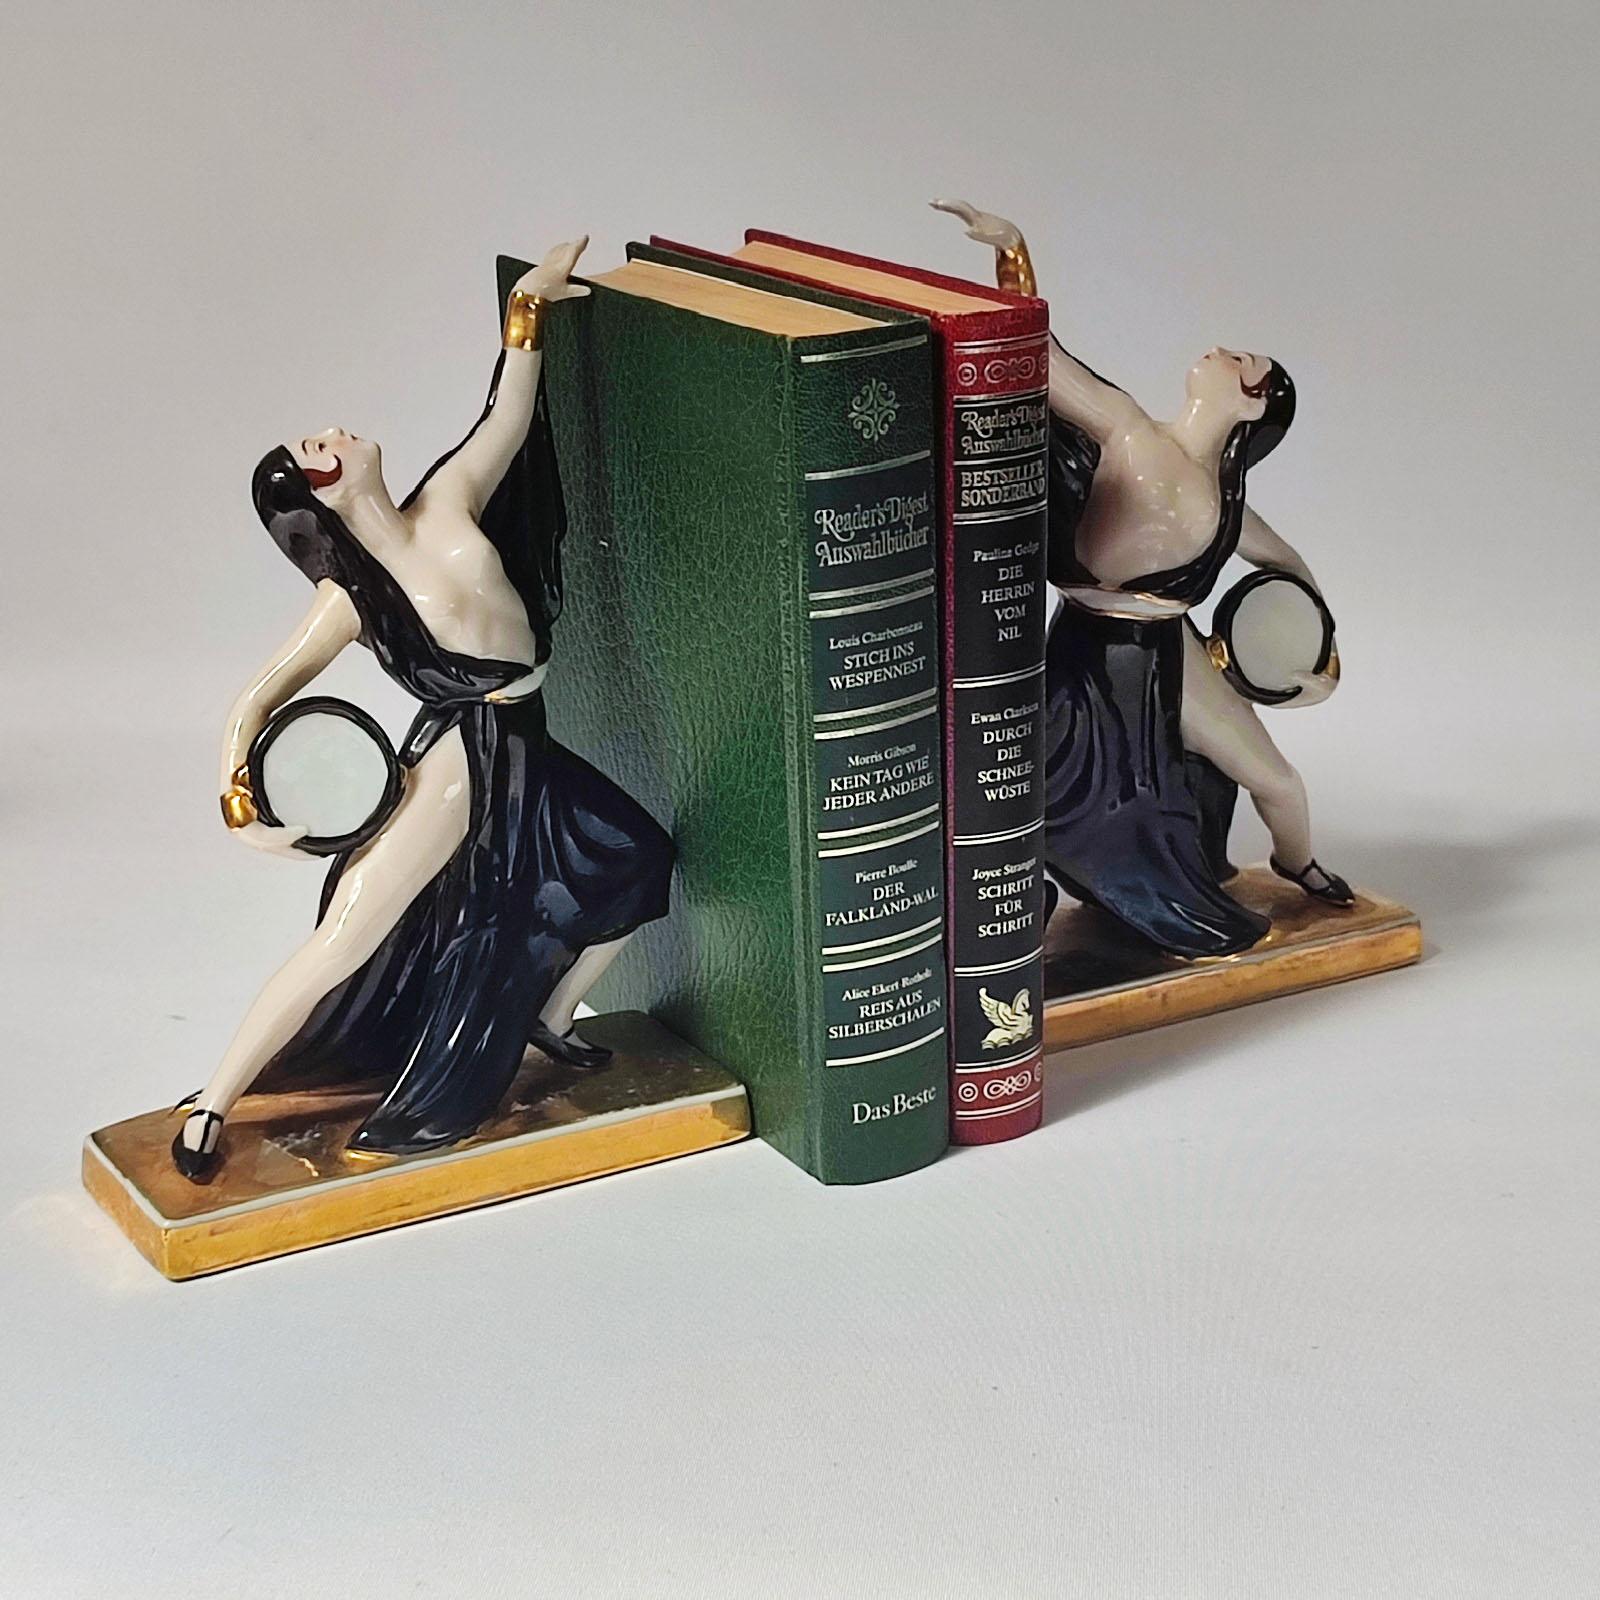 Pair of Art Deco ceramic bookends depicting two dancers. Stamped under the bottom ROBJ, Paris.
Excellent condition.
Dimensions: 14 x 5.5 x 20 cm (5.51 x 2.16 x 7.87 in).